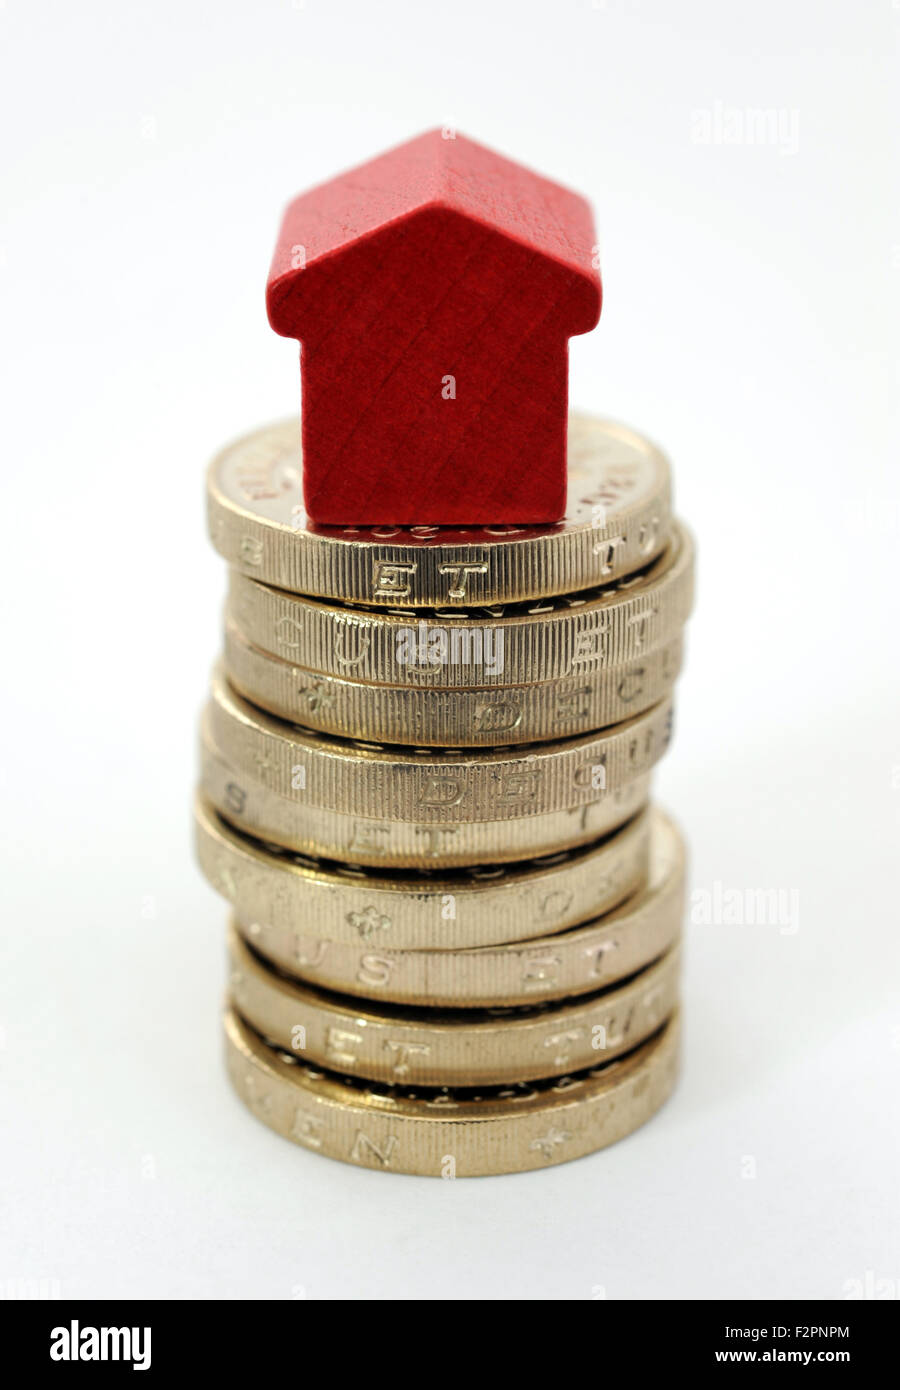 MONOPOLY HOUSE ON STACK OF ONE POUND COINS RE HOUSE PRICES VALUES PROPERTY MARKET HOME BUYING MORTGAGES SALES BUYERS RISING UK Stock Photo